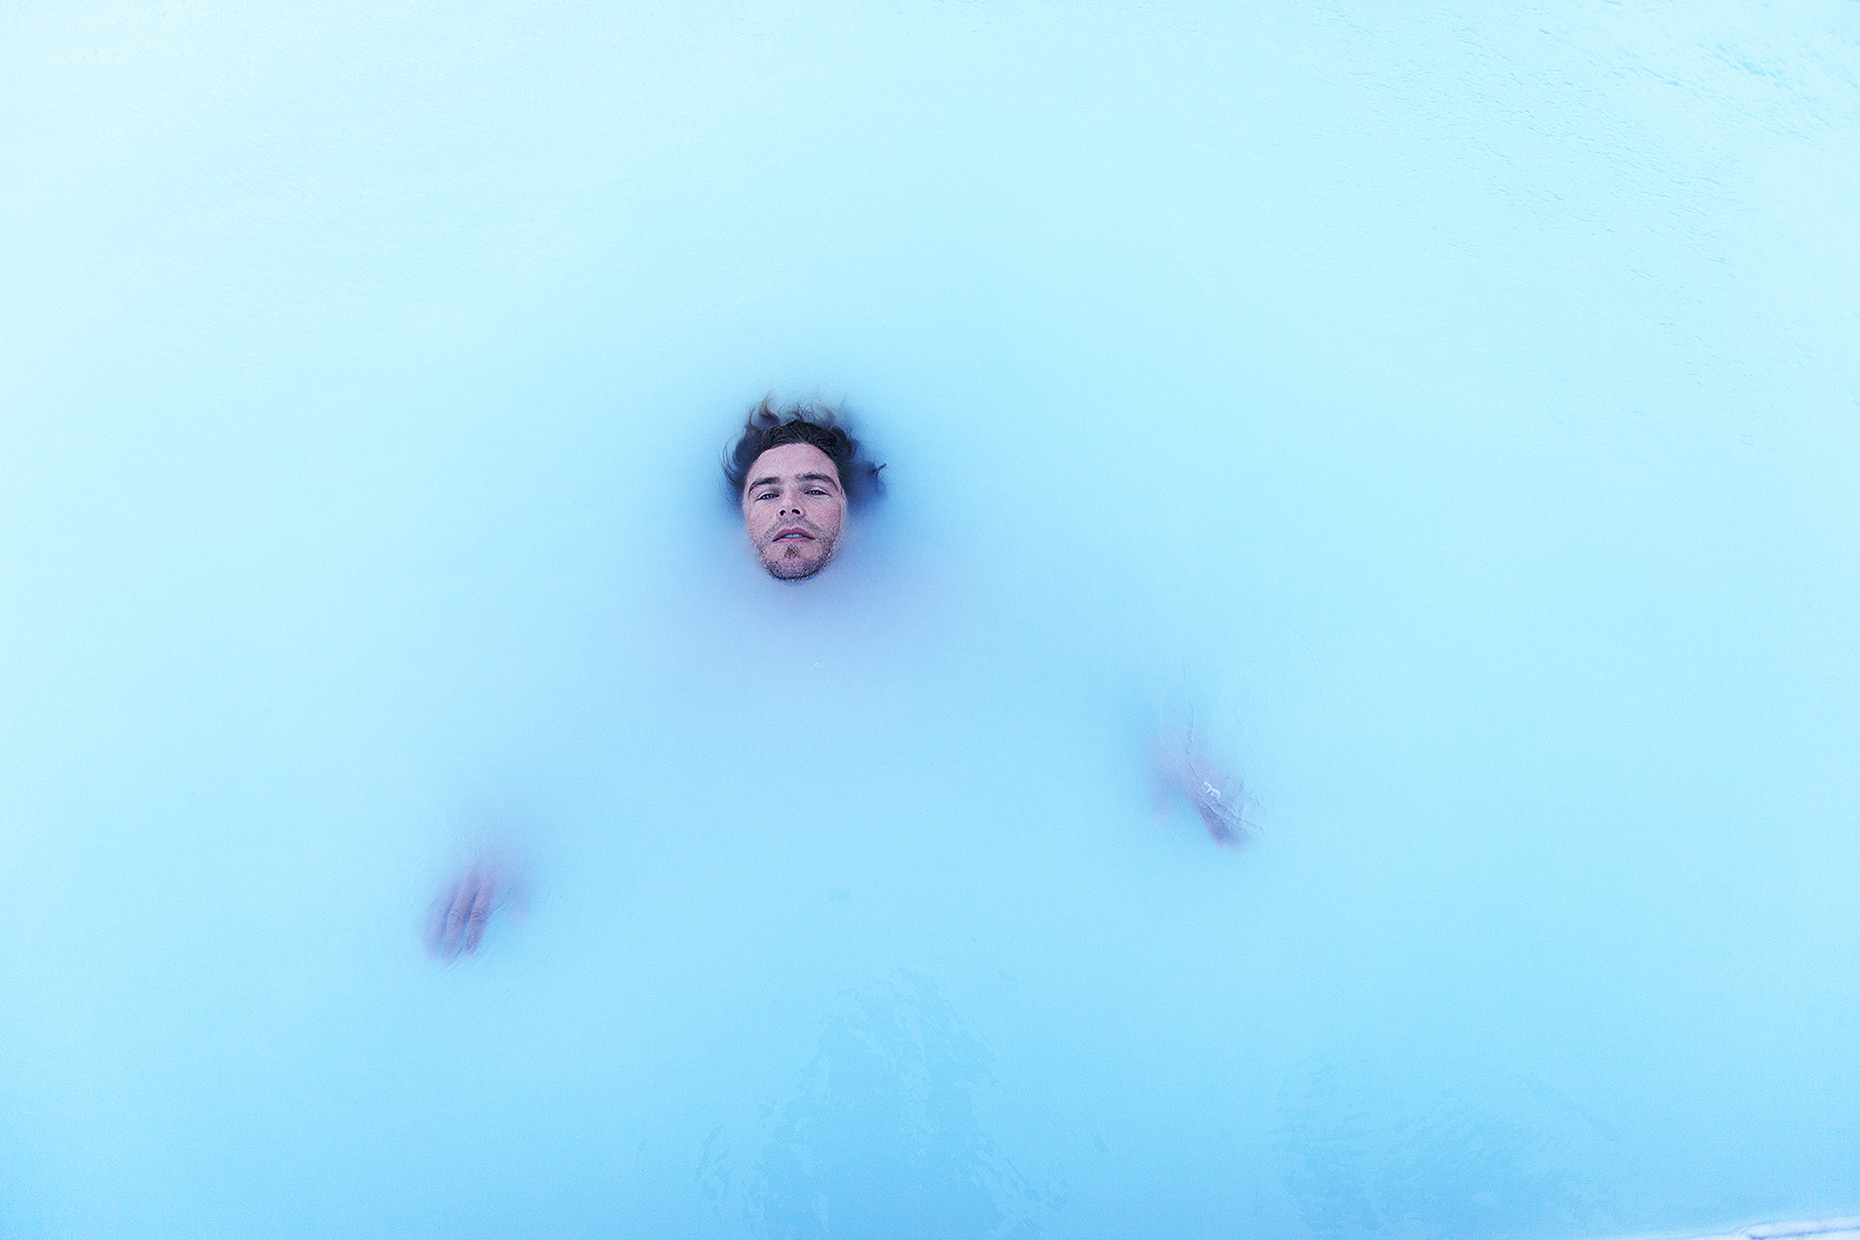 Jesse Hines in the Blue Lagoon in Iceland by Boston based commercial portrait photographer Brian Nevins